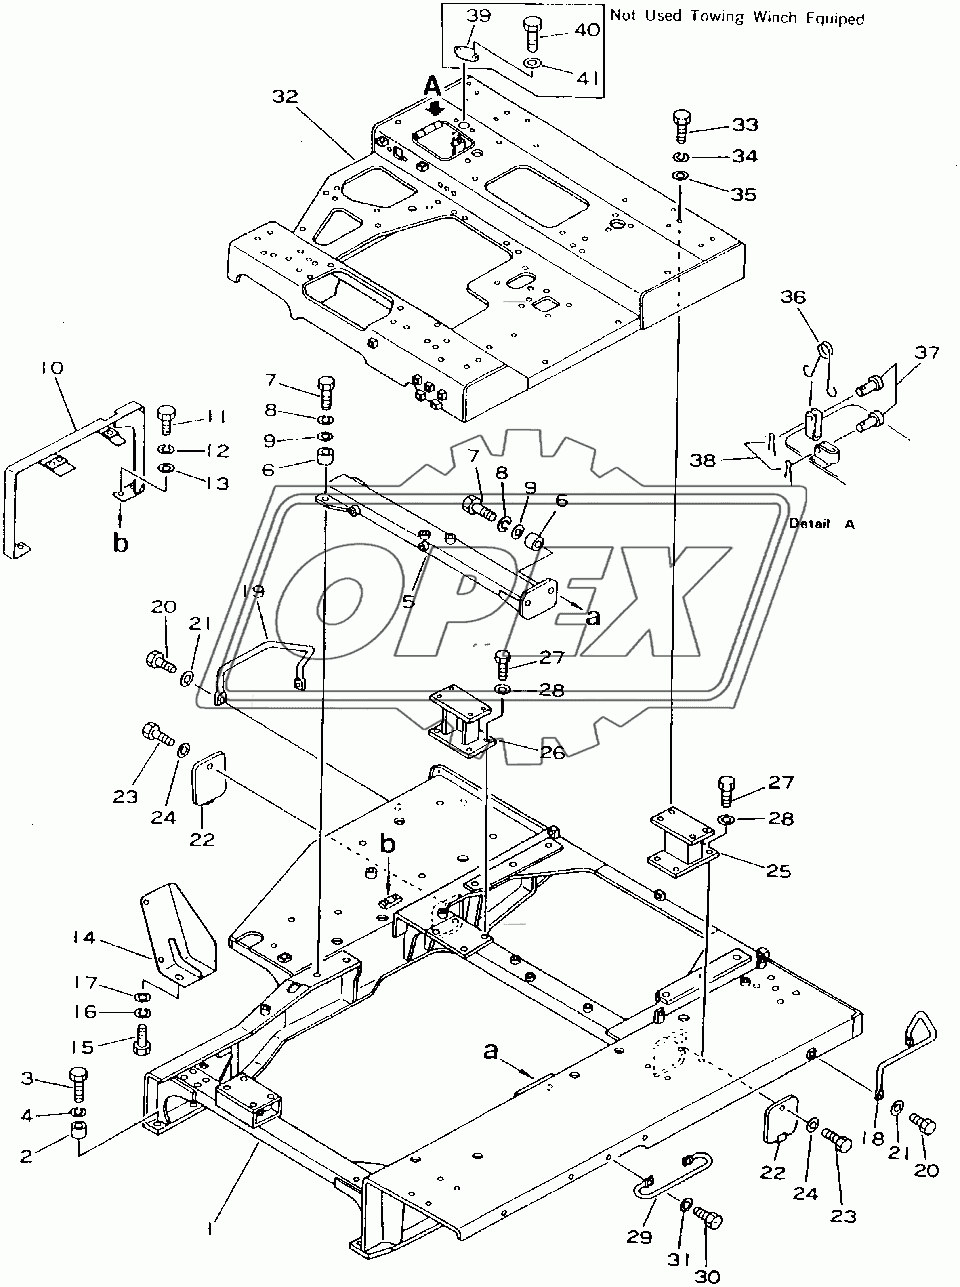  FEND AND FLOOR FRAME(15686-31573)